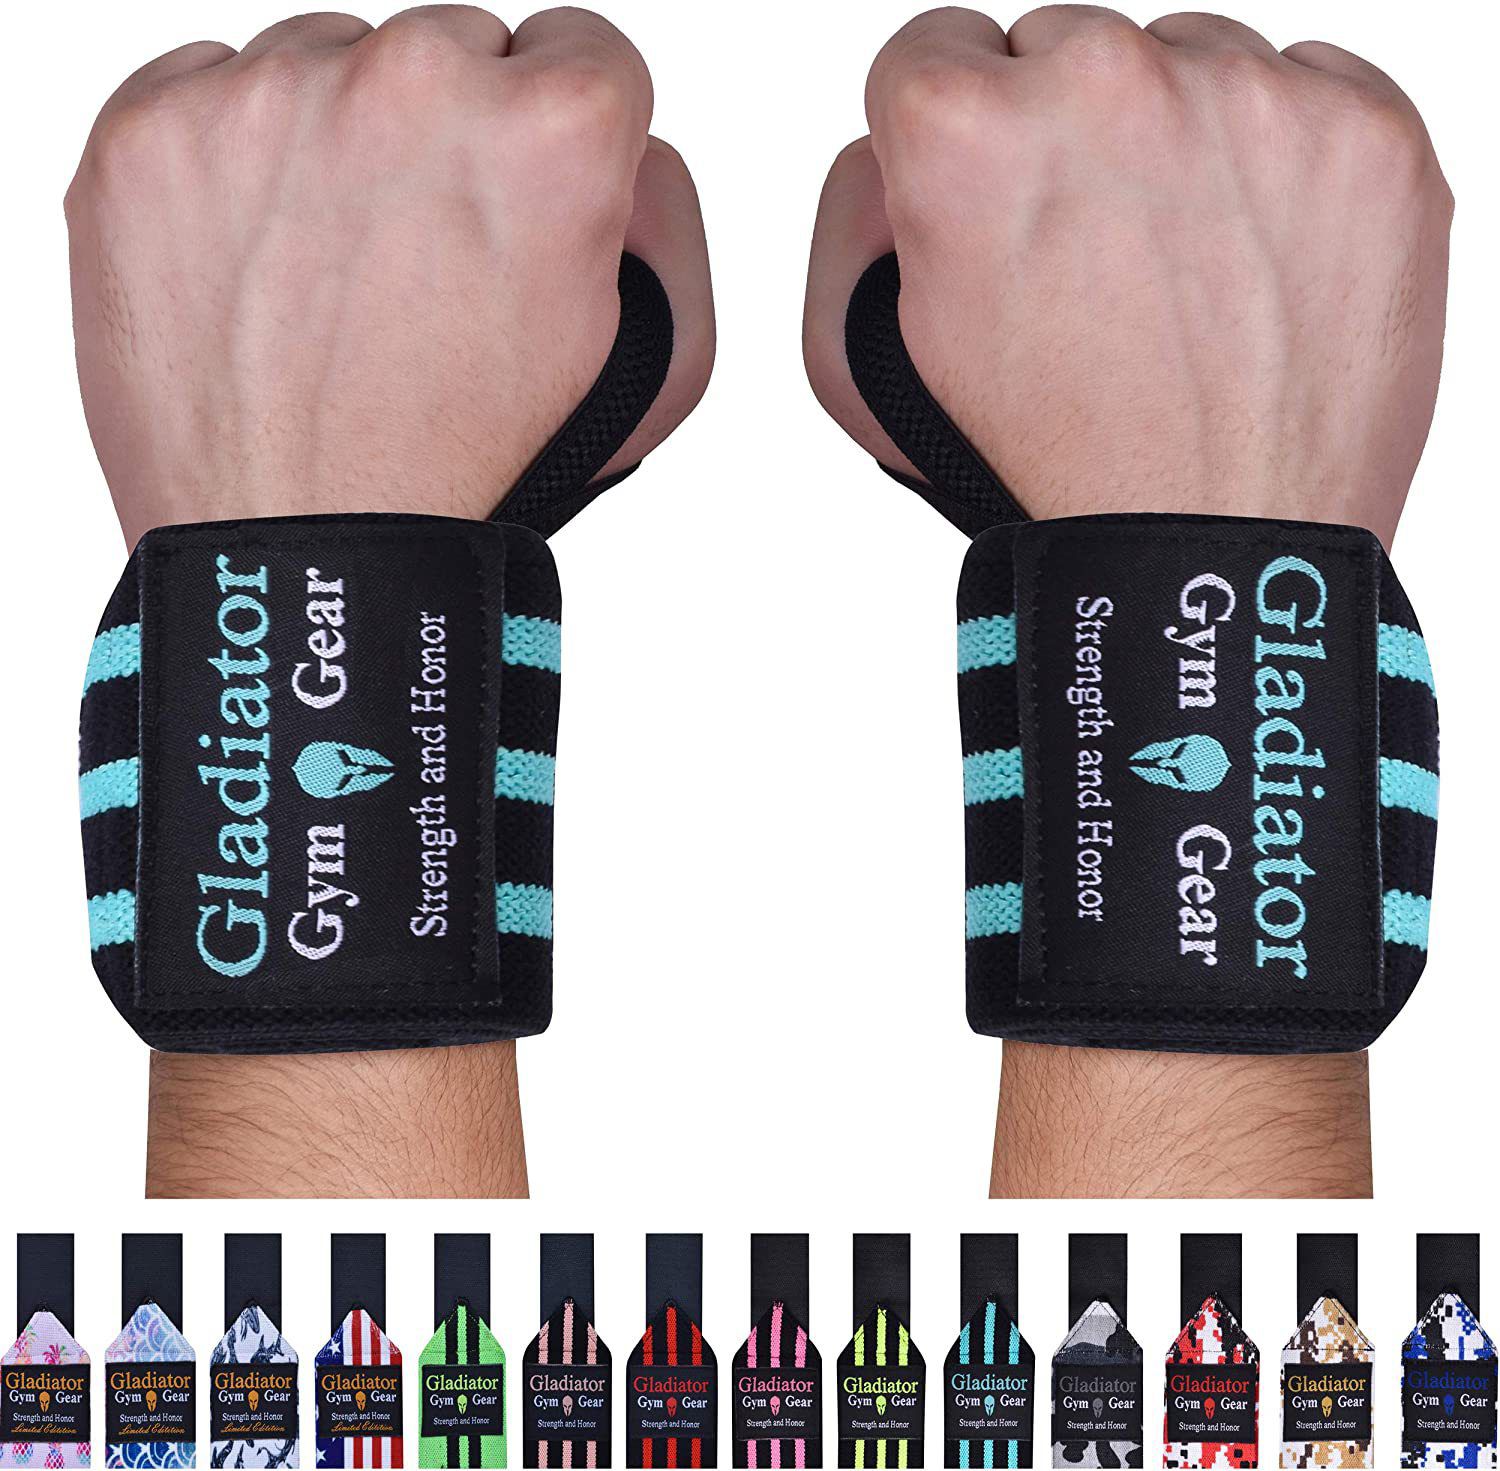 wrist support weight lifting